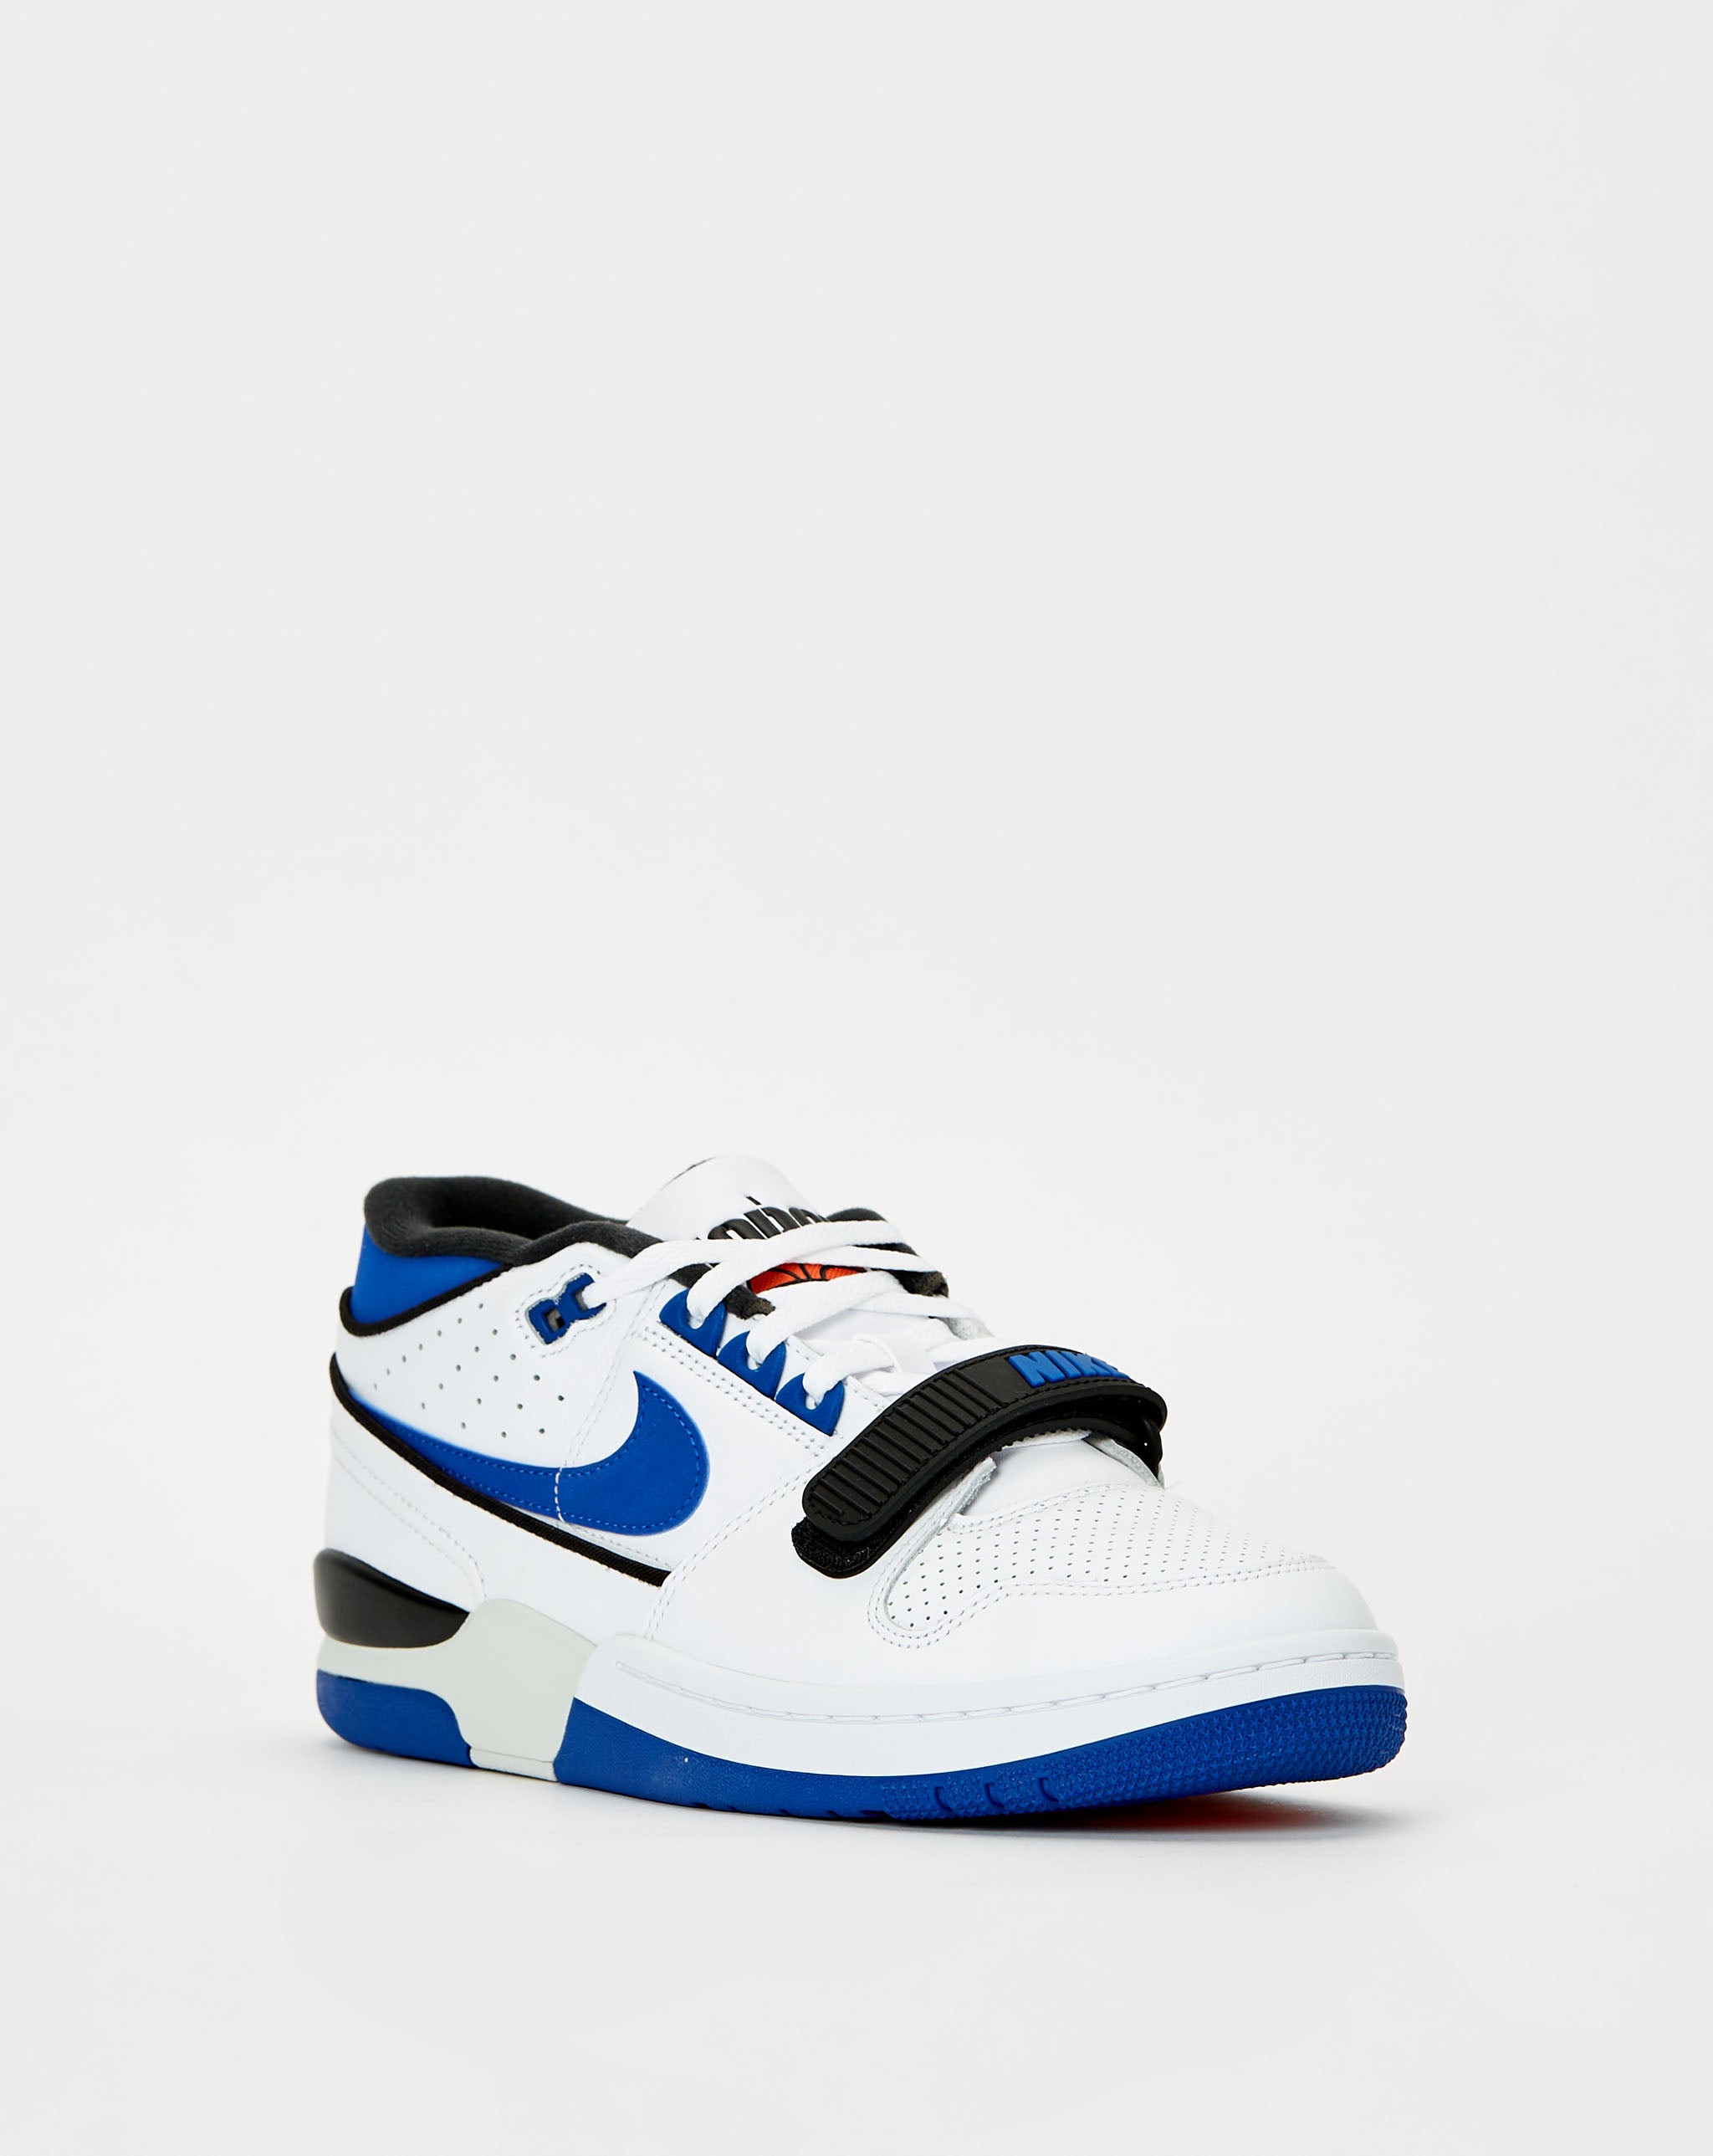 Nike Embroidered Force logo adds retro appeal / 6.5  - Cheap Urlfreeze Jordan outlet